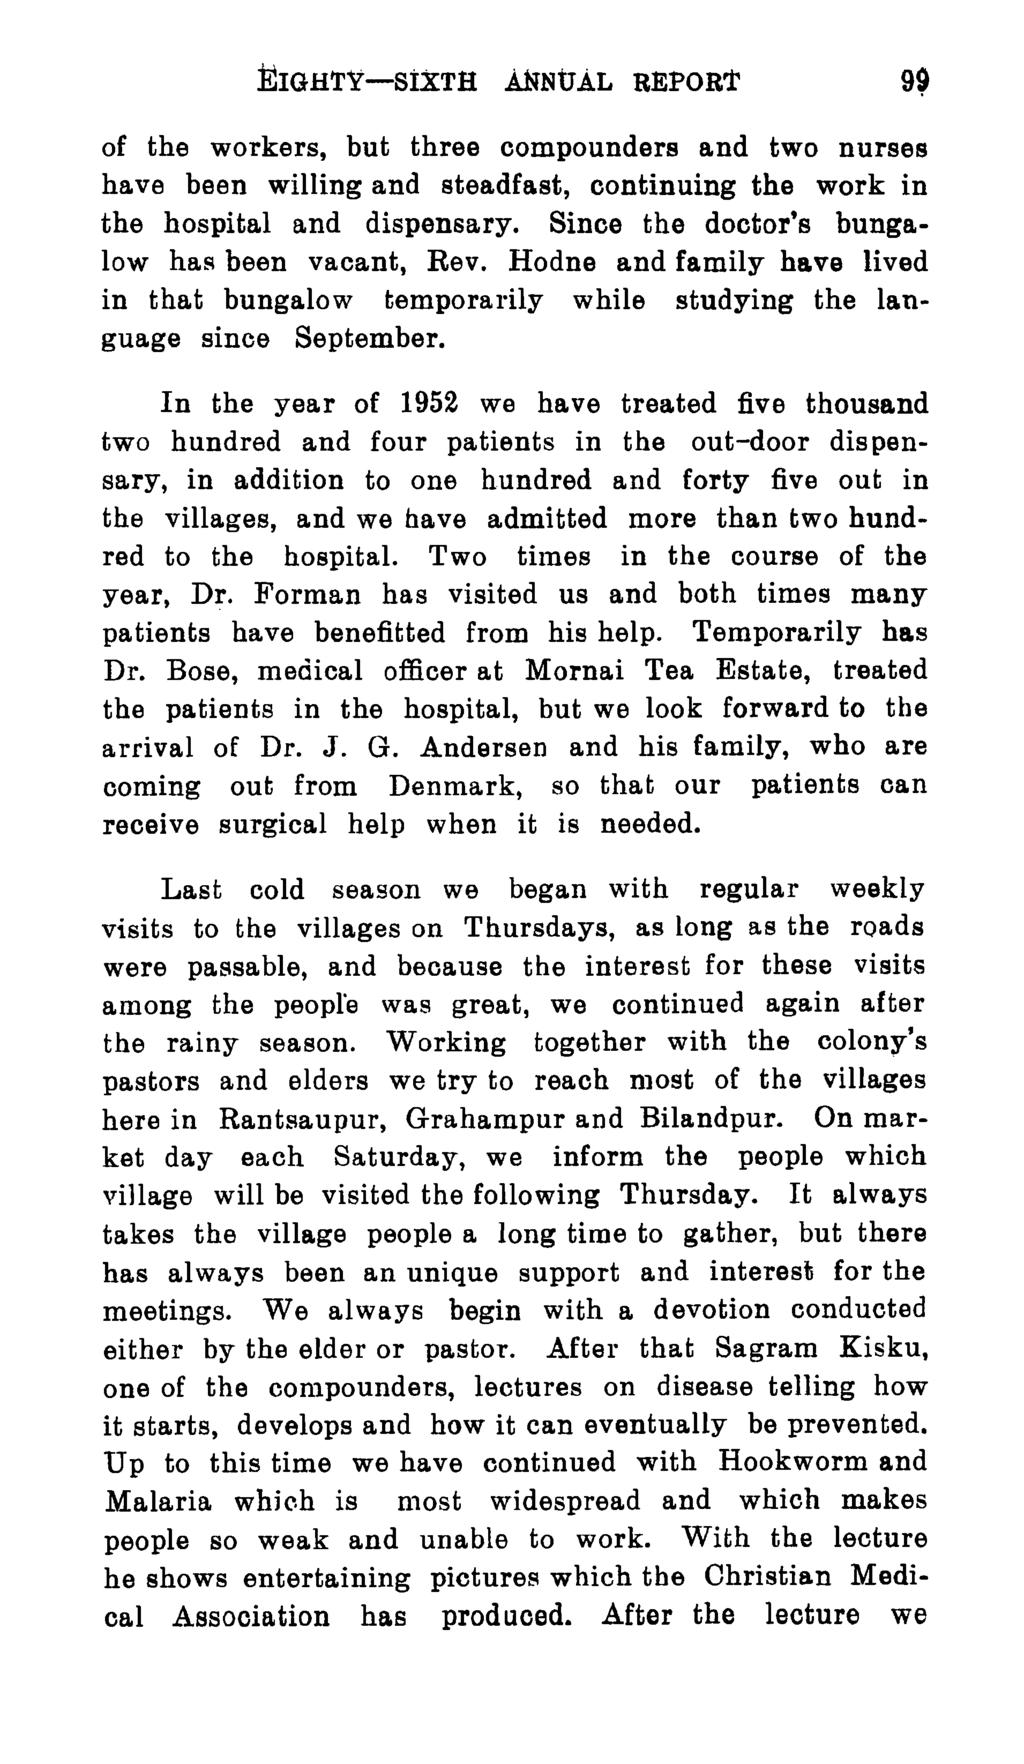 EhGHl'Y-SIXTH.ANNUAL REPORT of the workers, but three compounders and two nurses have been willing and steadfa.st, continuing the work in the hospital and dispensary.